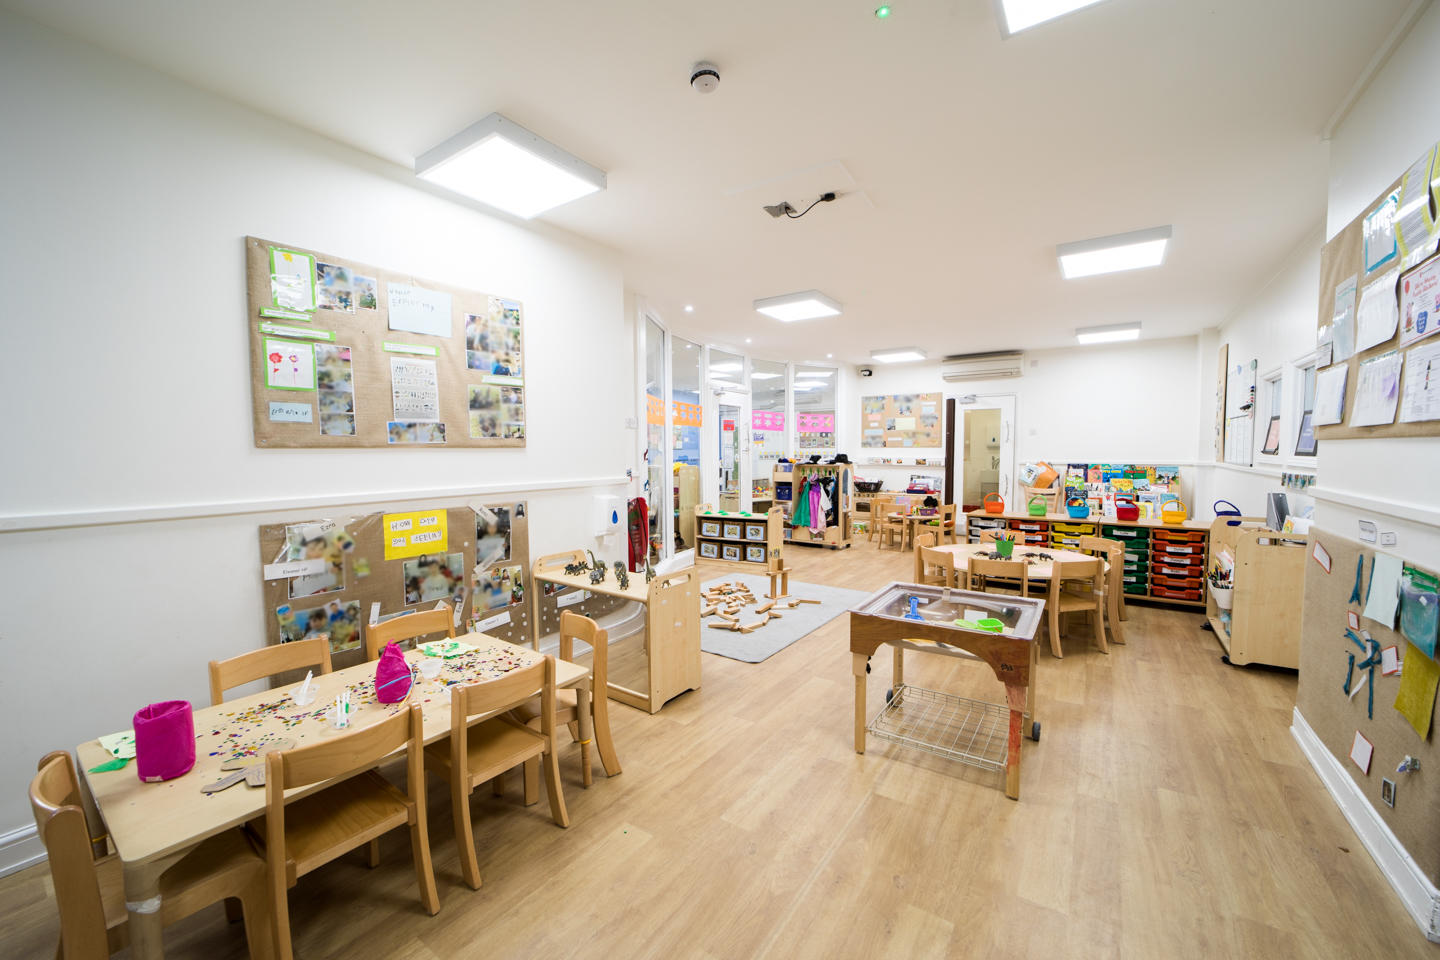 Bright Horizons Crouch End Fields Day Nursery and Preschool London 03432 496271